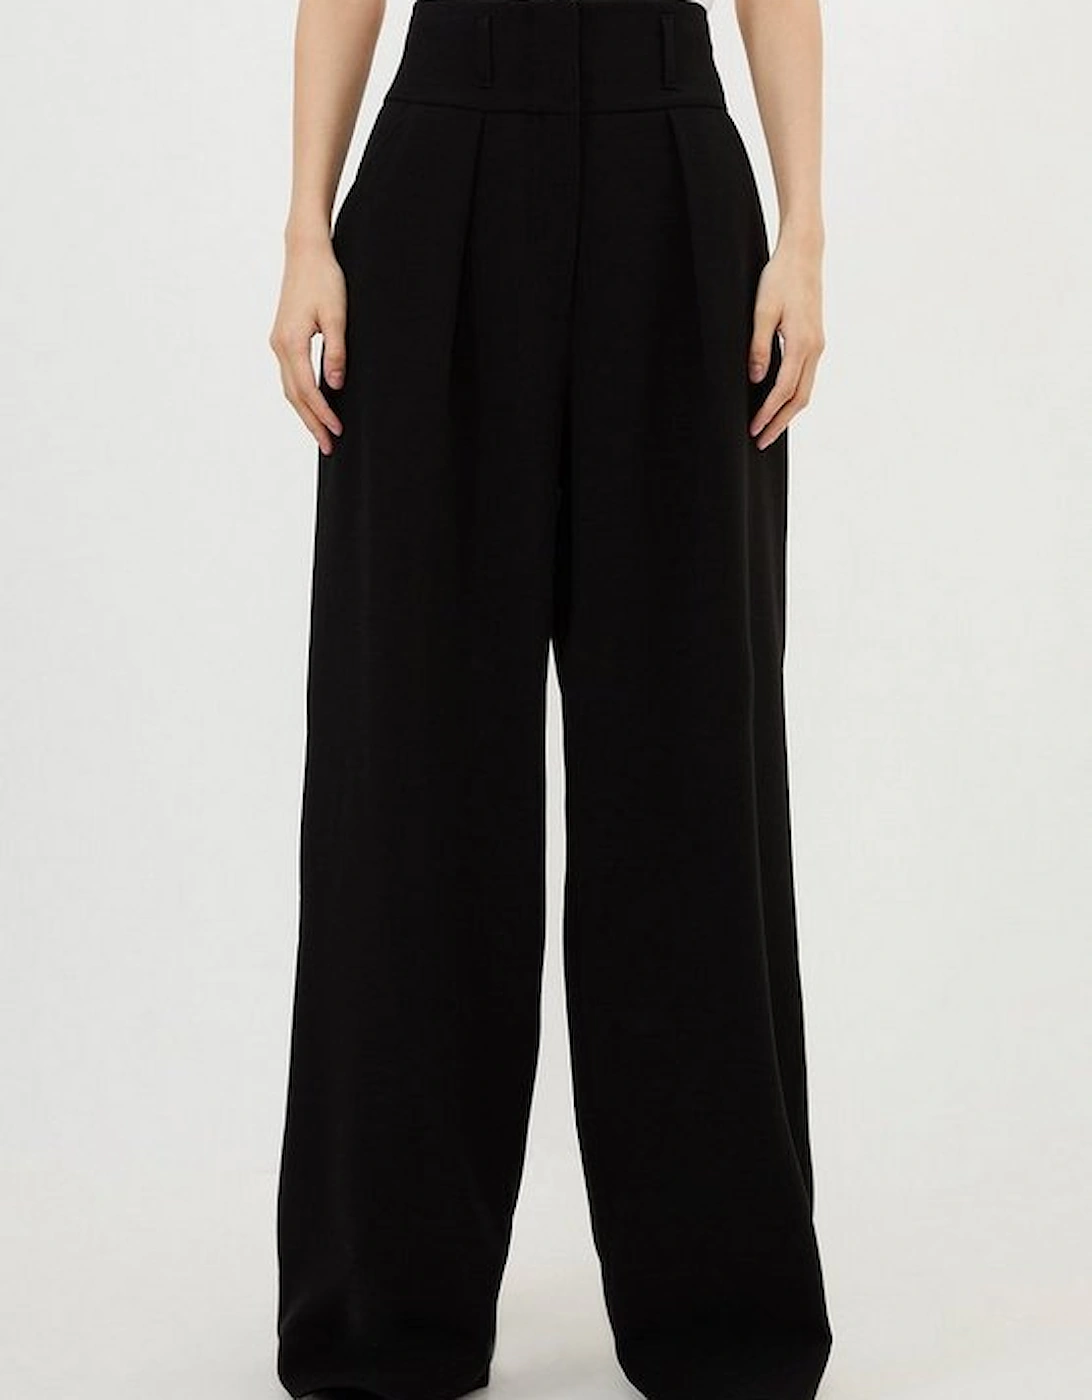 Petite Compact Stretch Tailored High Waist Wide Leg Trousers